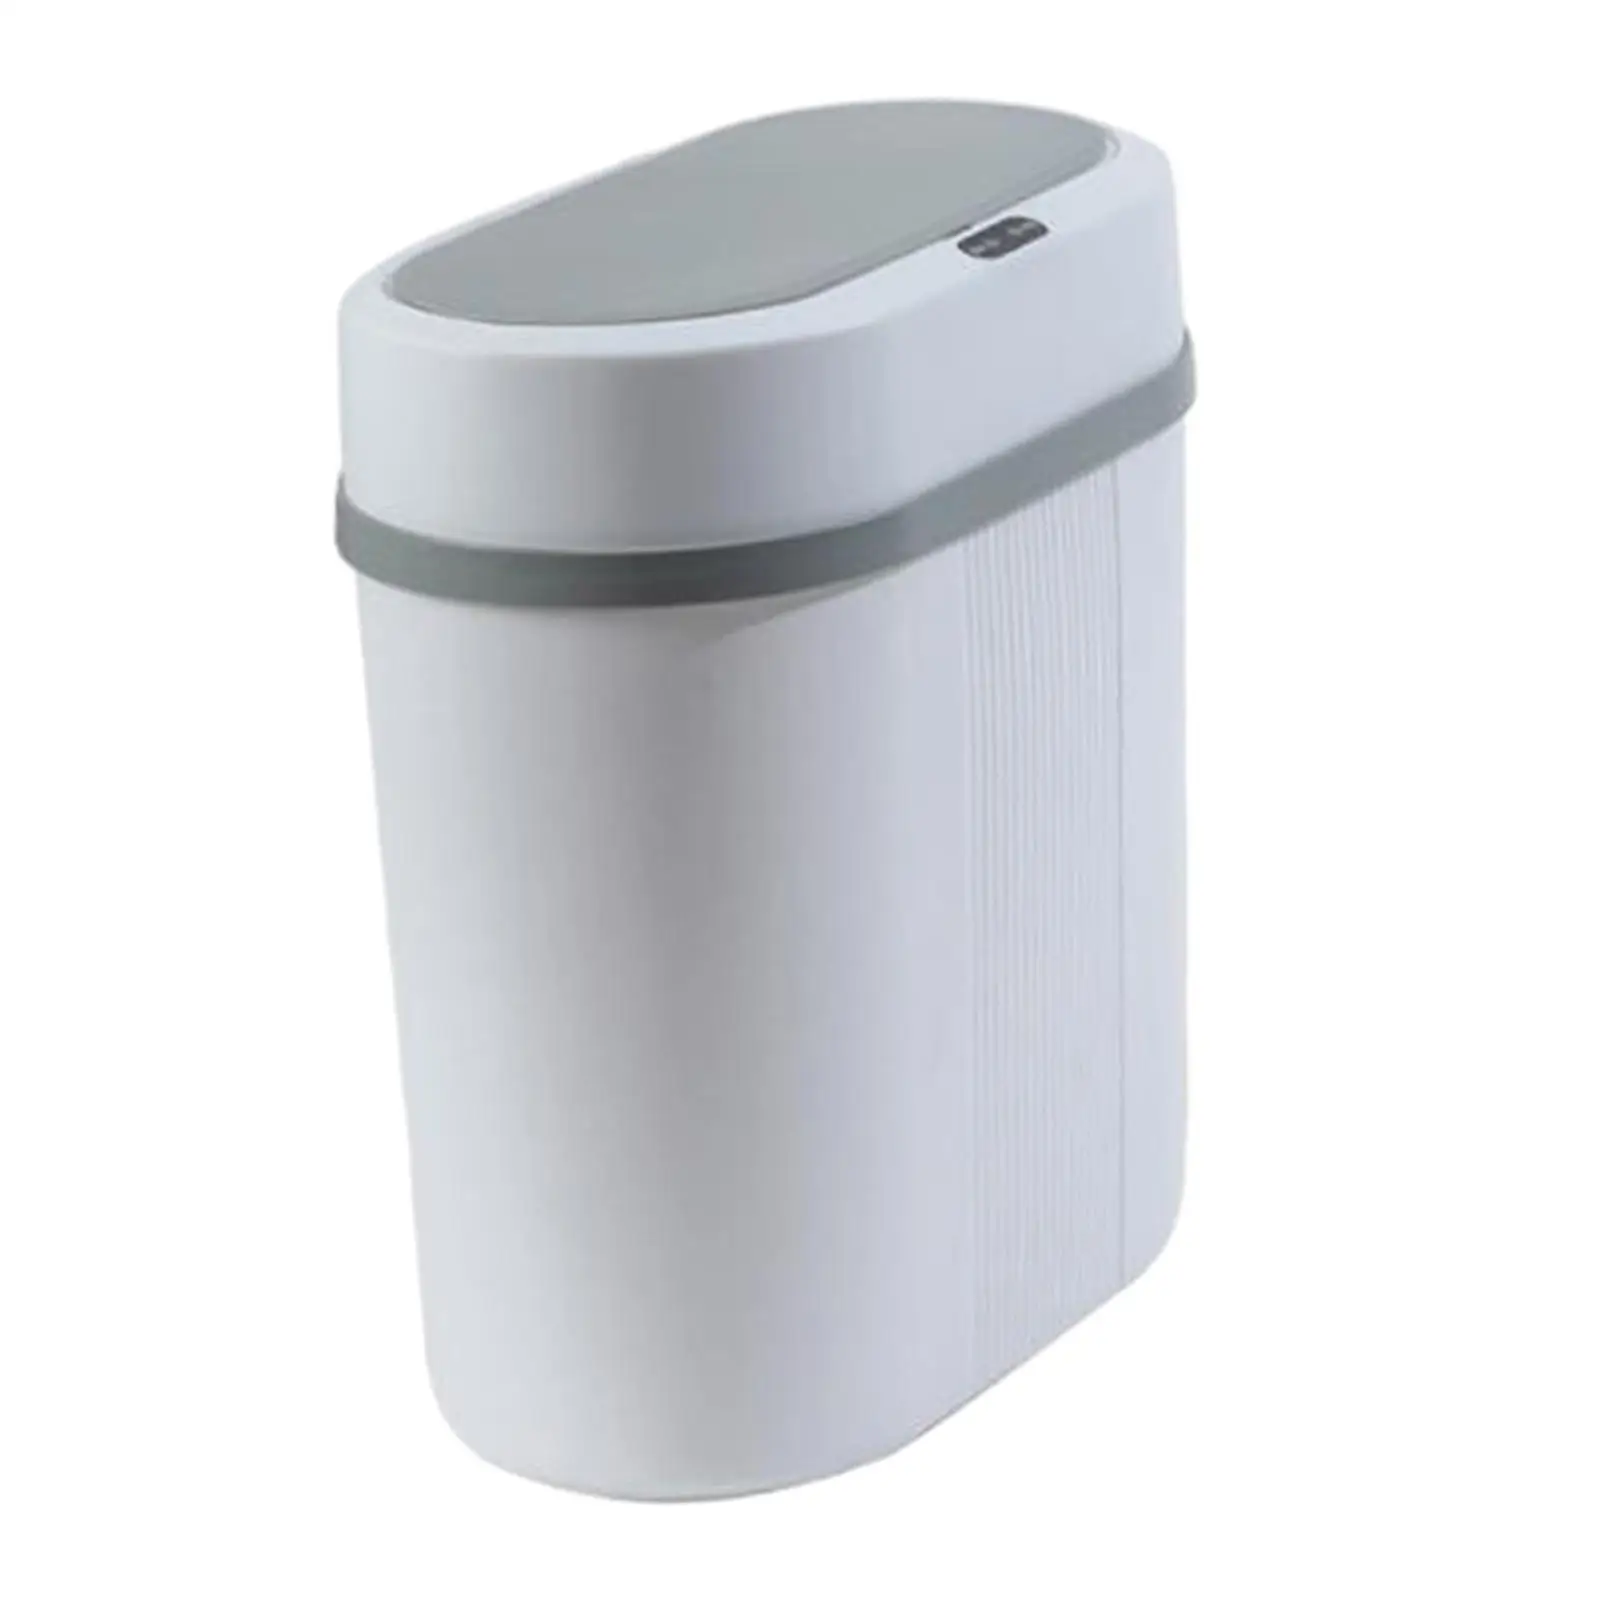 Smart Touchless Garbage Bin 12 Liter Trash Can Compact for Office Washroom